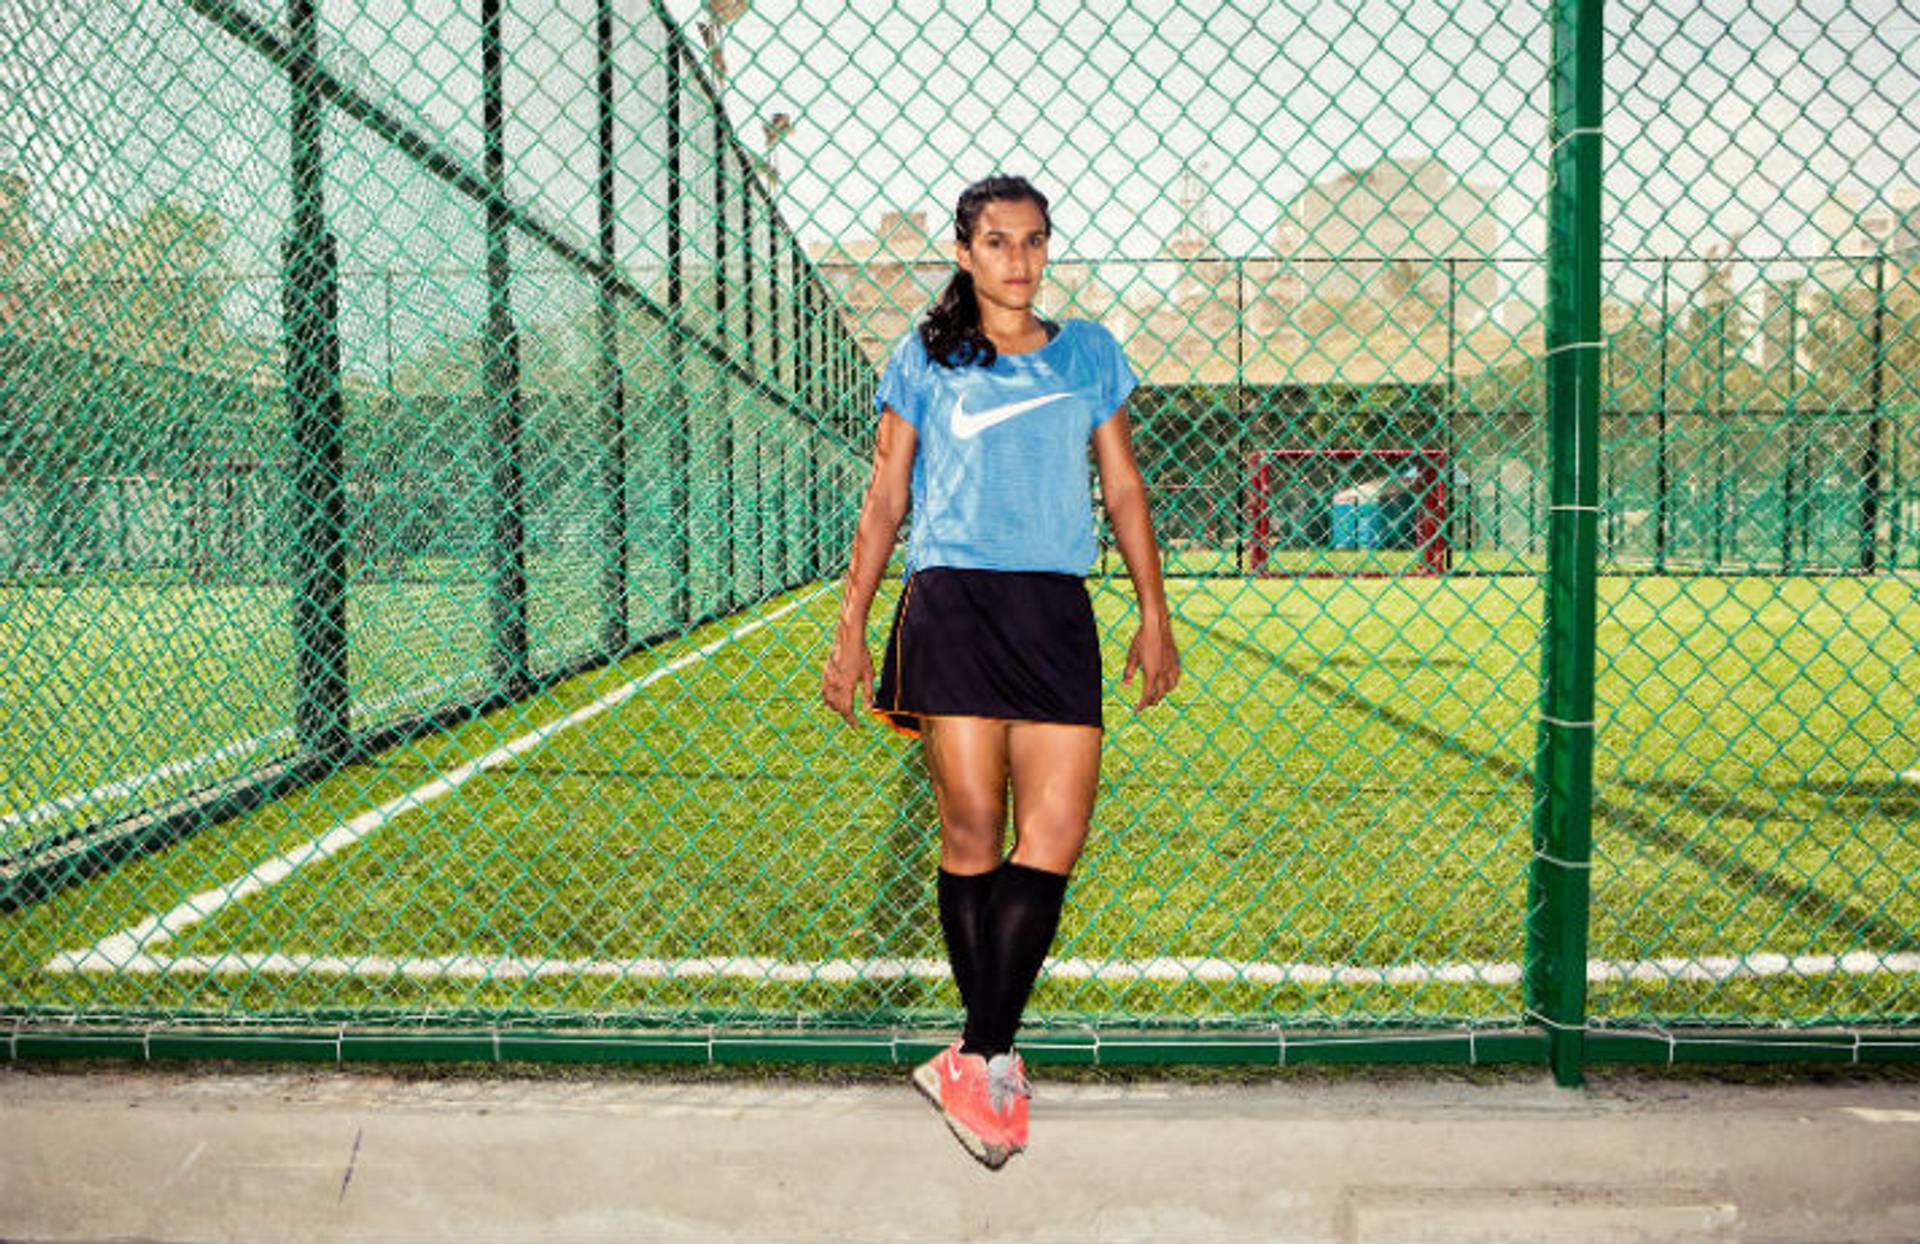 Indian women are getting into sport